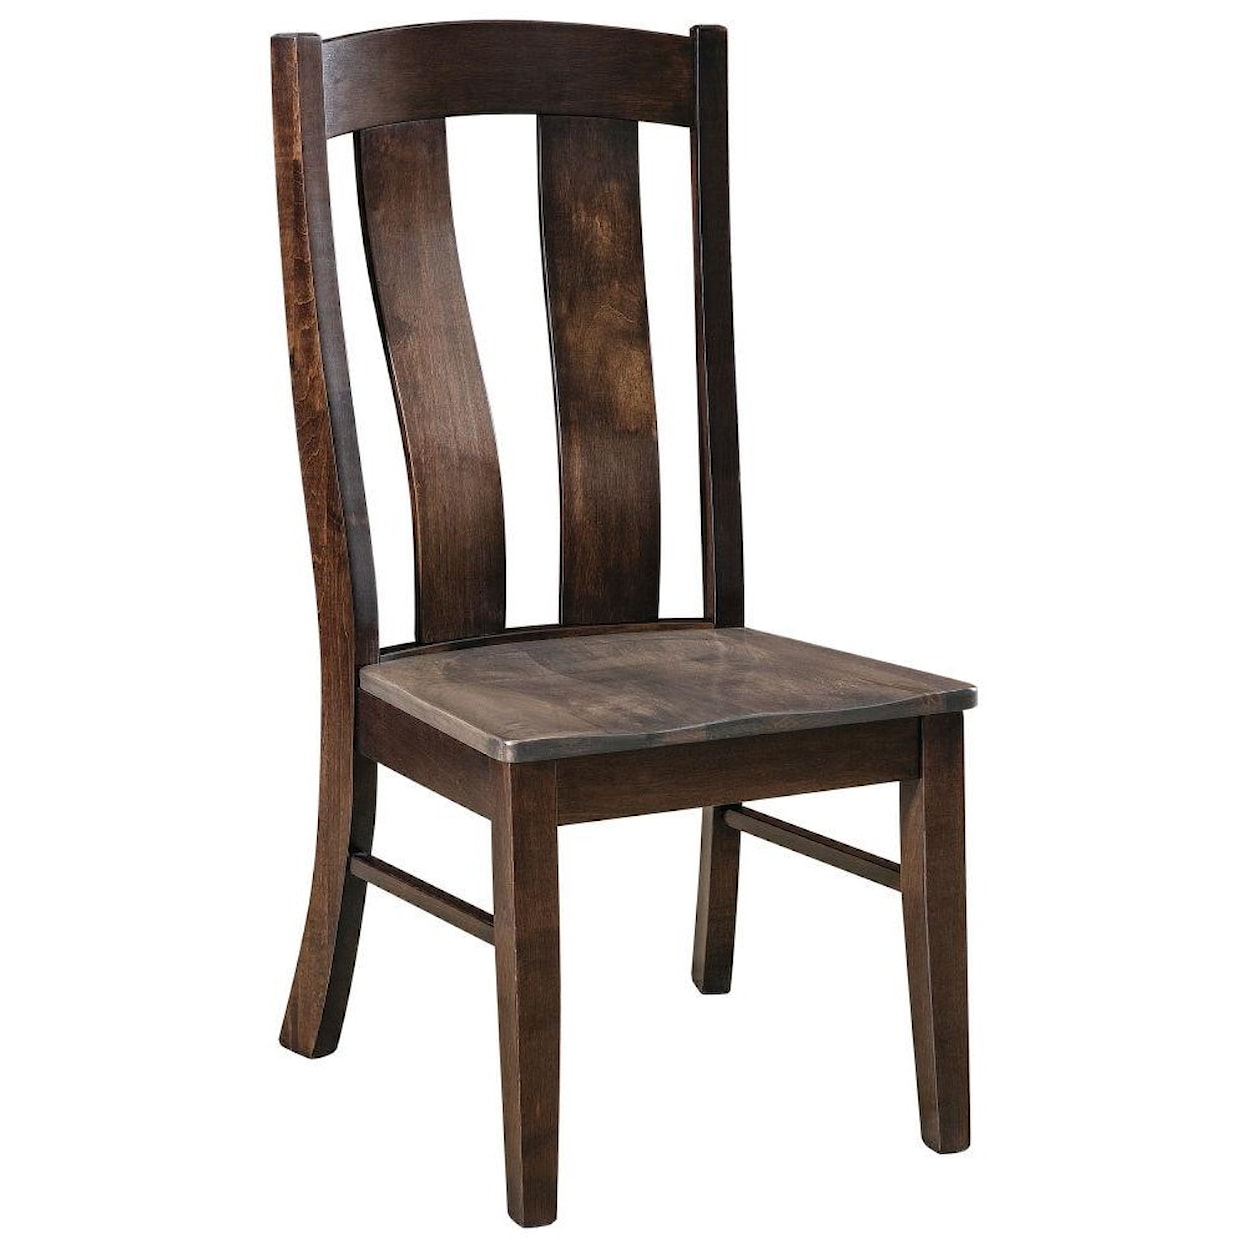 F&N Woodworking Laurie Side Chair